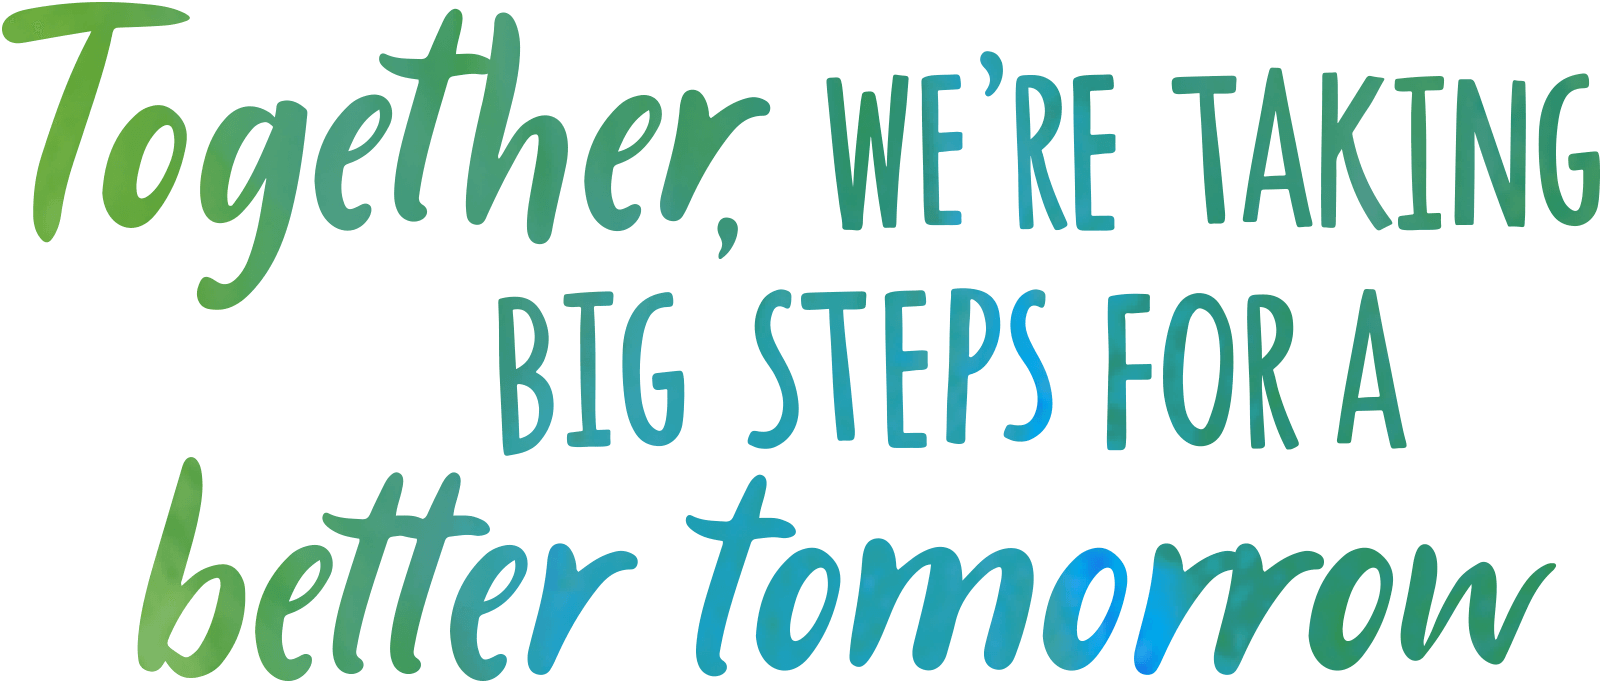 Together, we're taking big steps for a better tomorrow